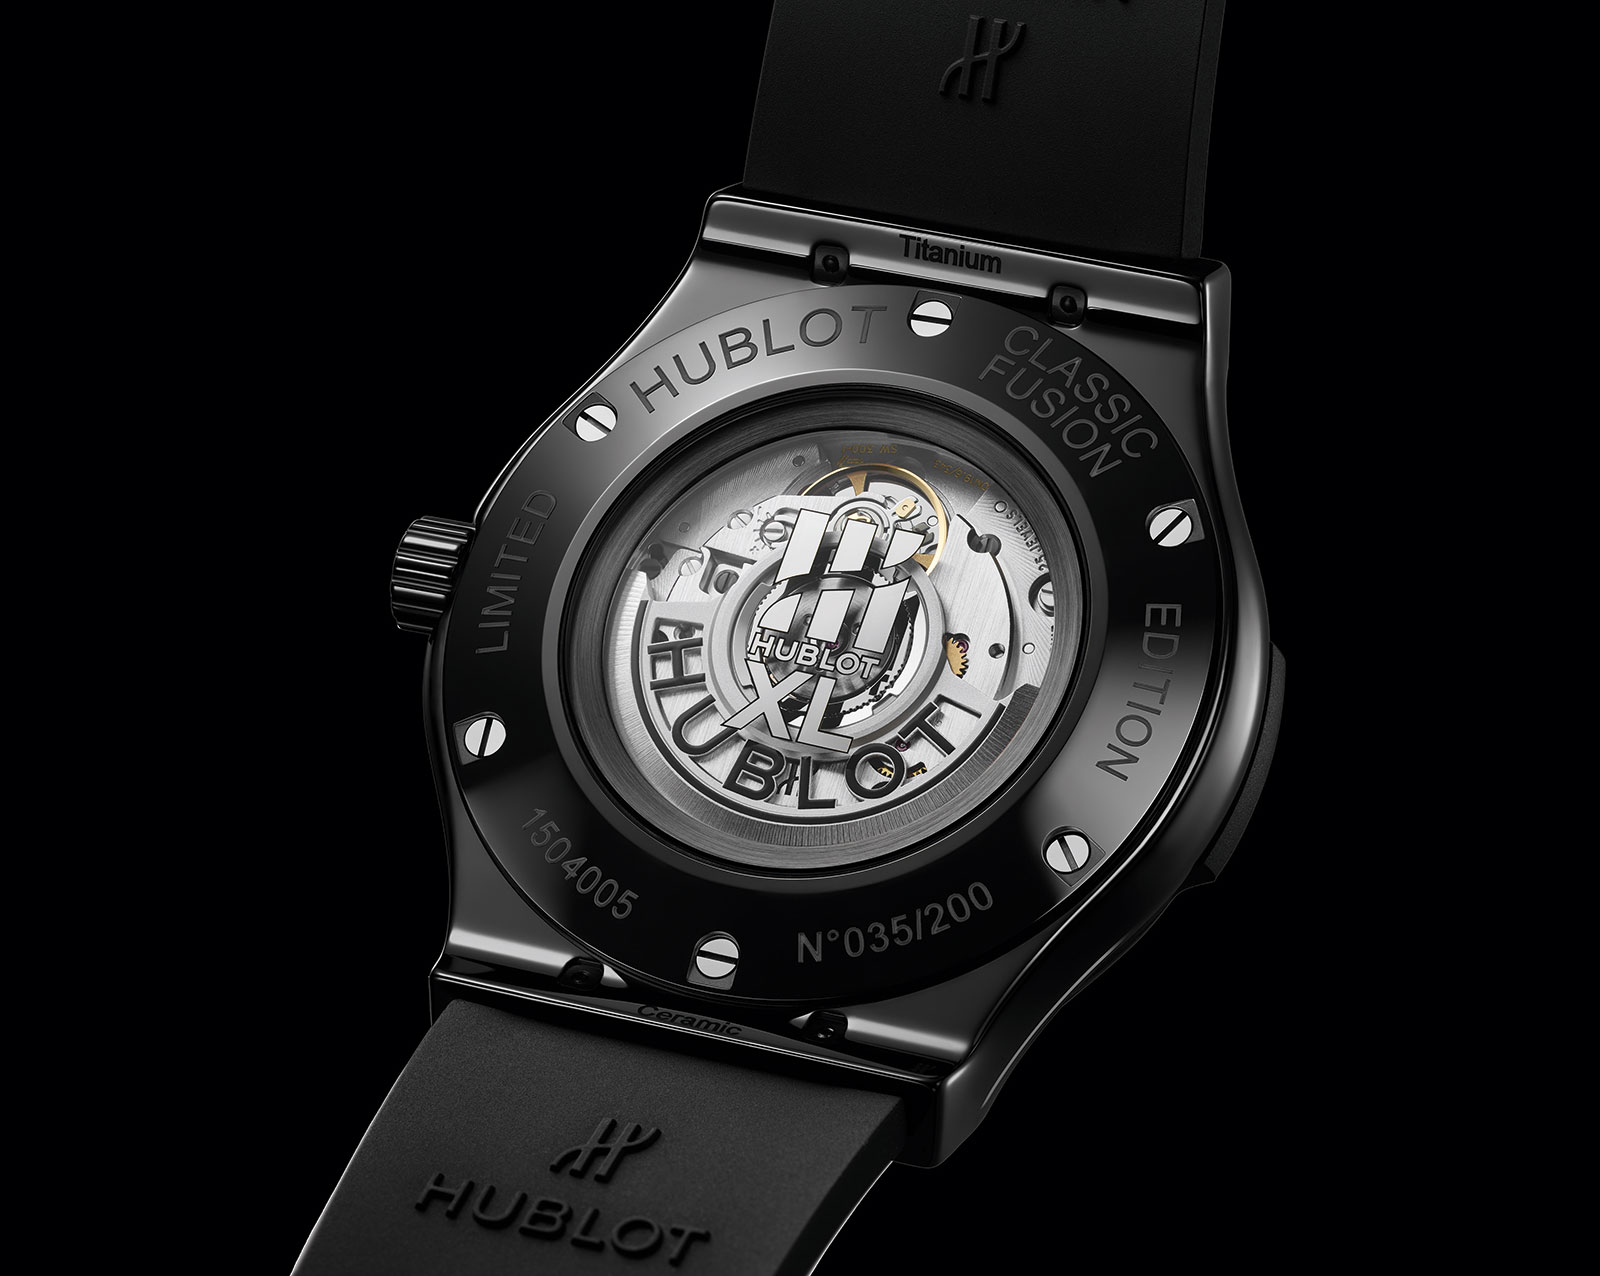 Hublot Introduces the Classic Fusion Elements in Mineral Stone